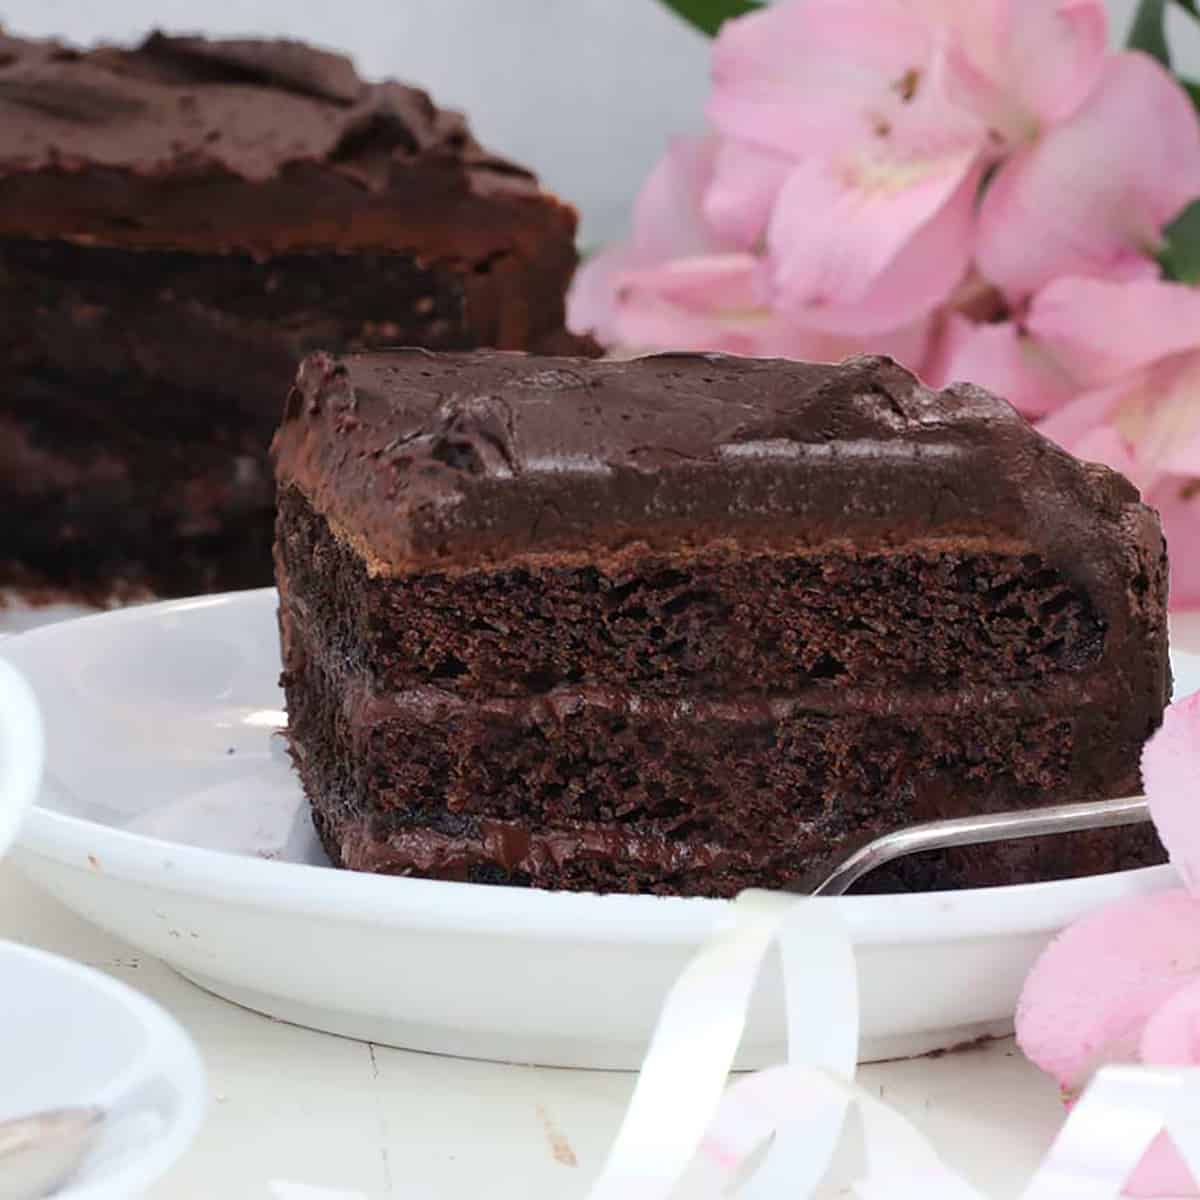 slice of chocolate cake with three layers and a pink flower beside it